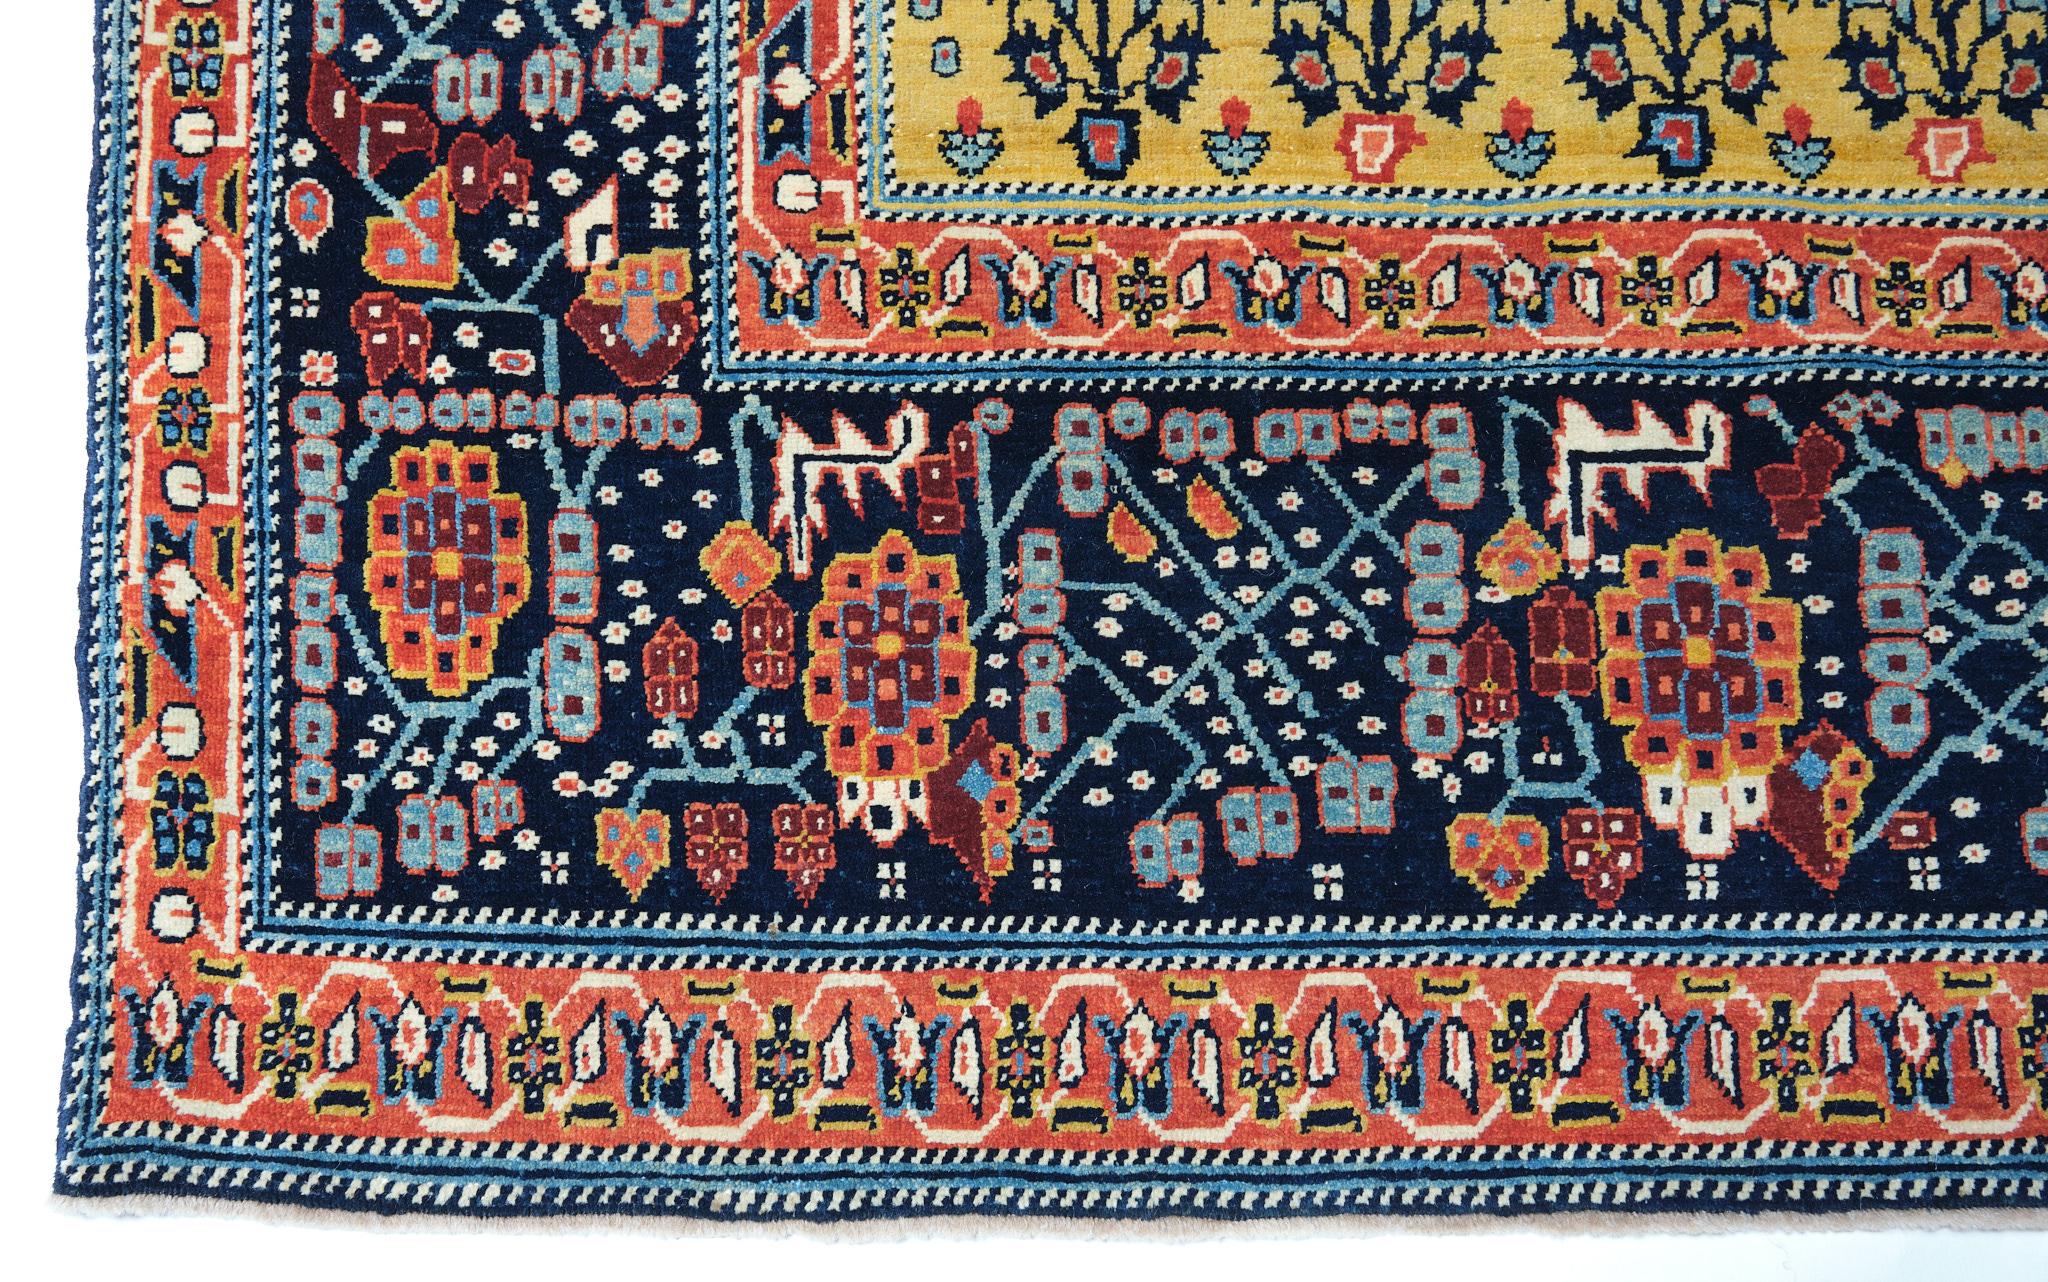 Turkish Ararat Rugs Senna Rows of Flowers Rug, 19th Century Revival Carpet Natural Dyed For Sale